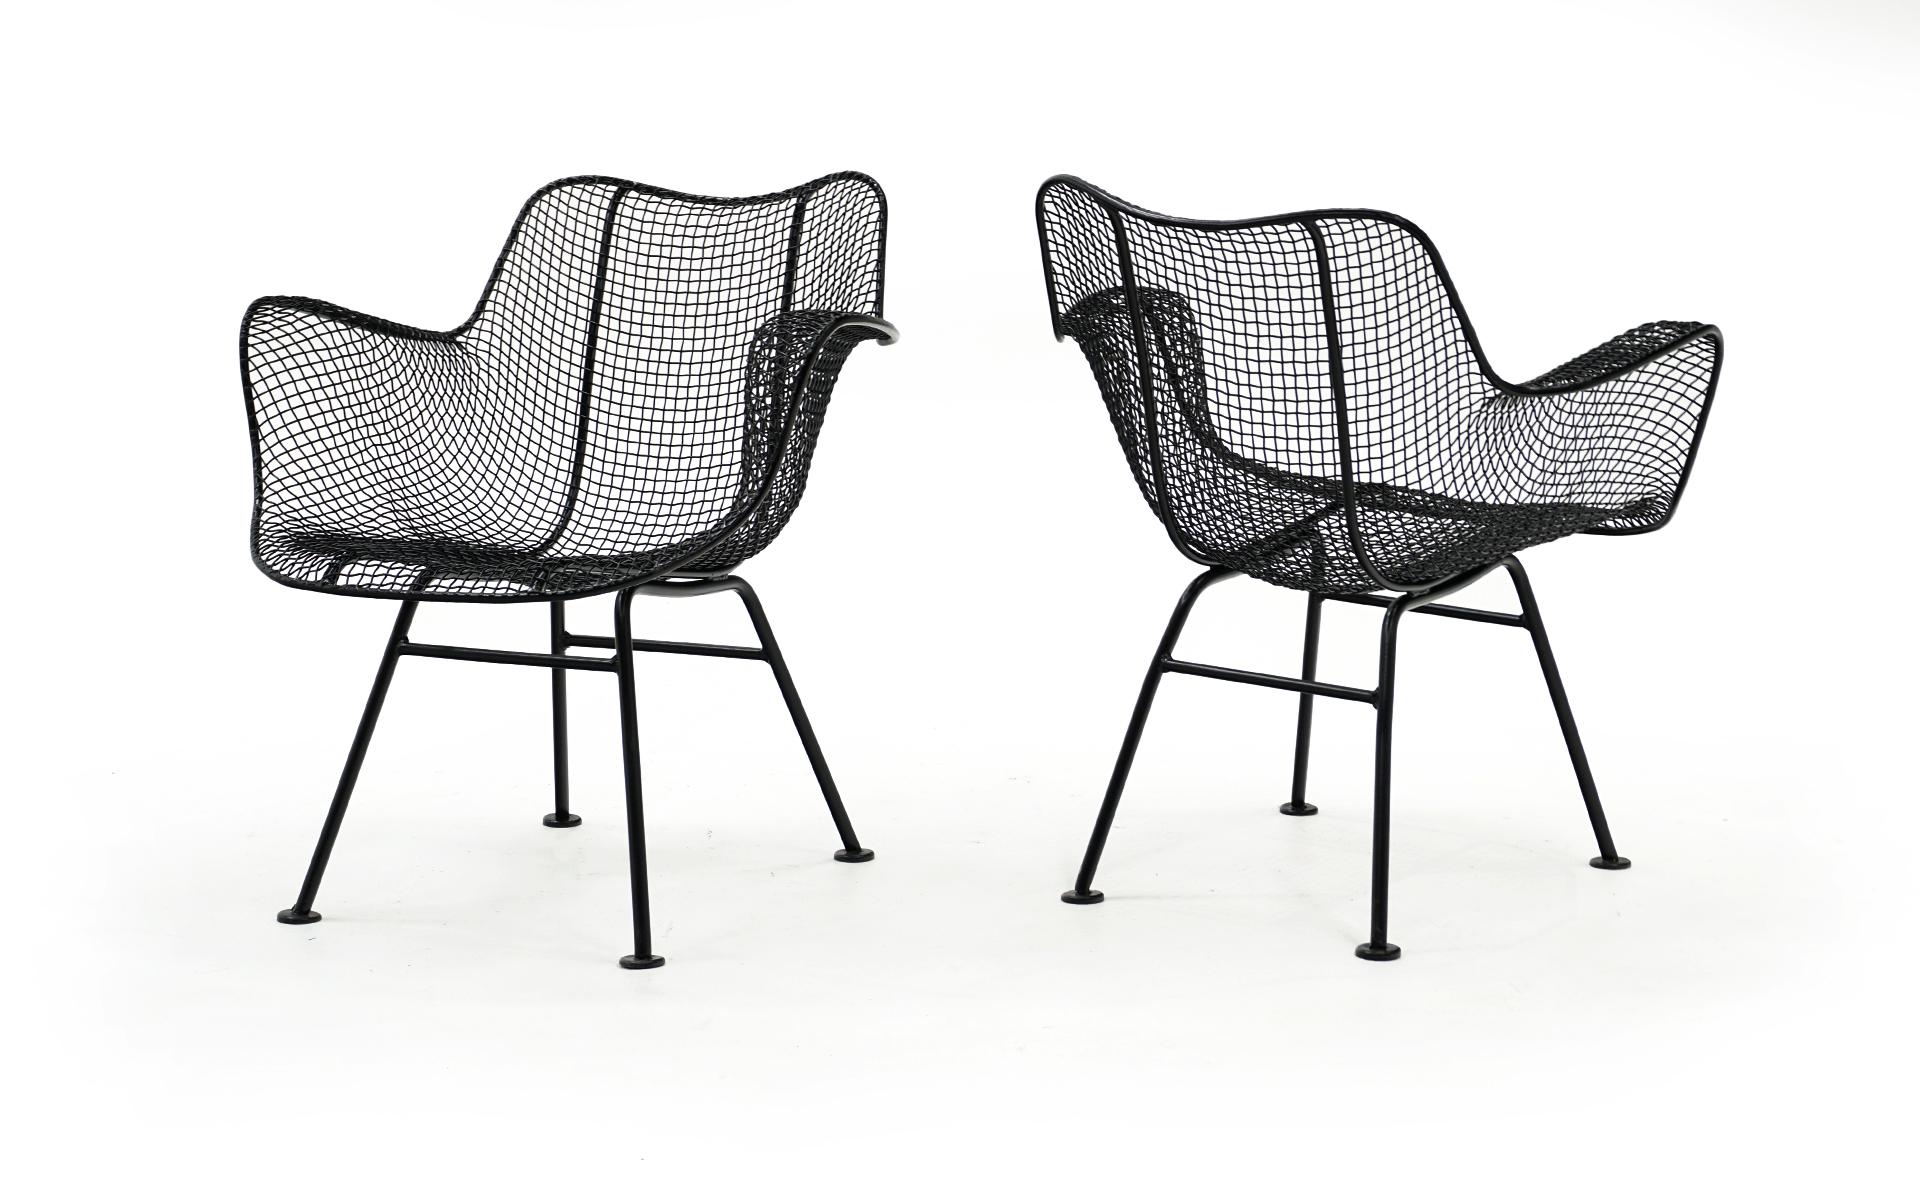 Powder-Coated 4 Sculptura Lounge Chairs with Arms by John Woodard Black Woven Wire Restored